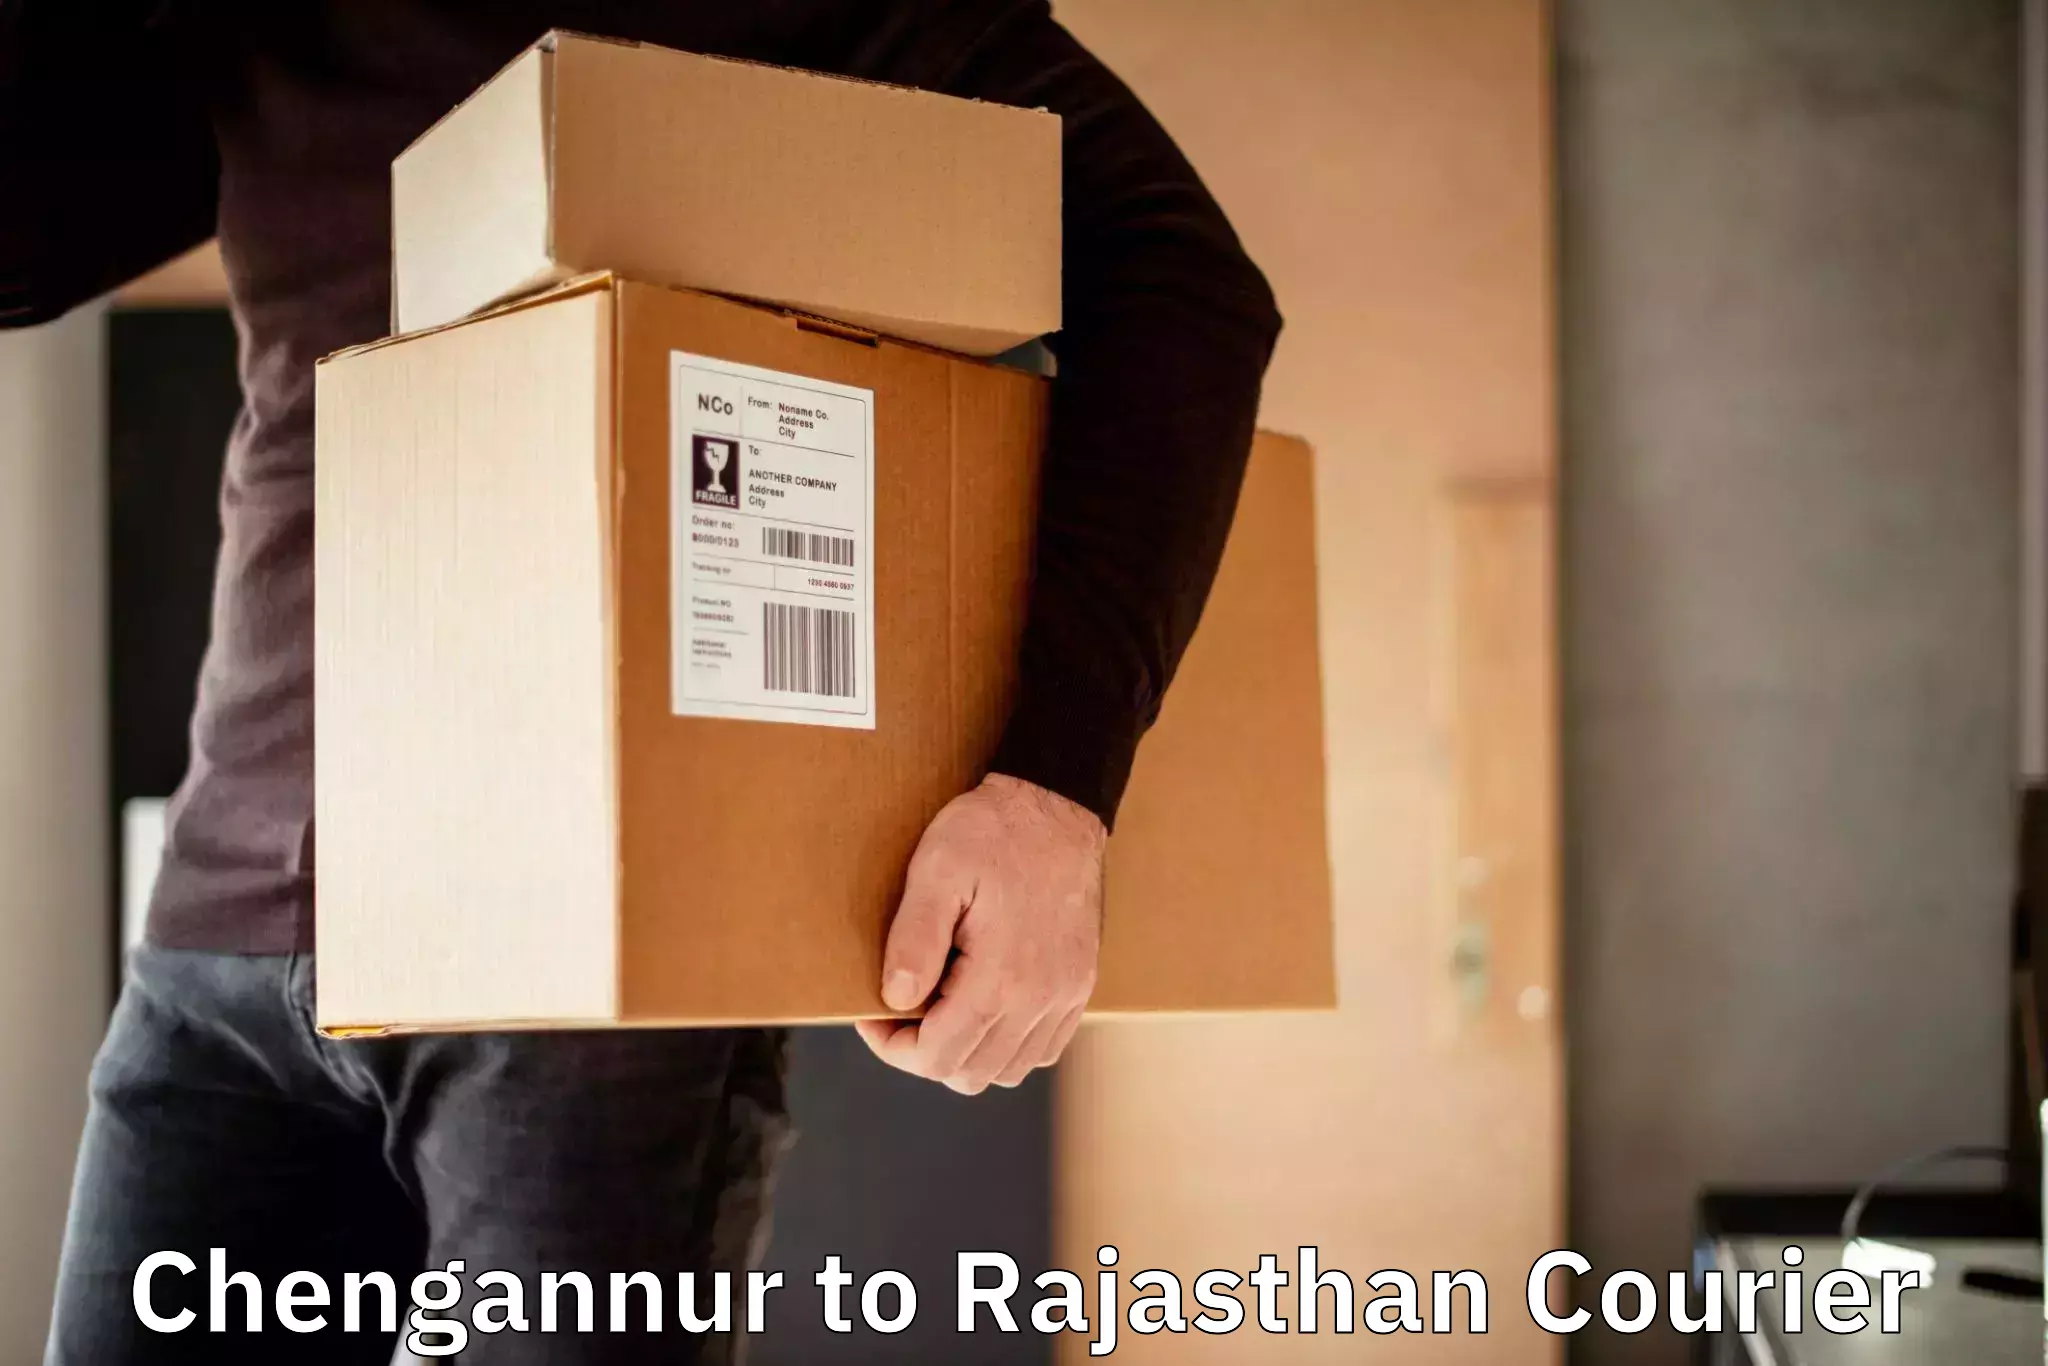 User-friendly delivery service Chengannur to Rajasthan